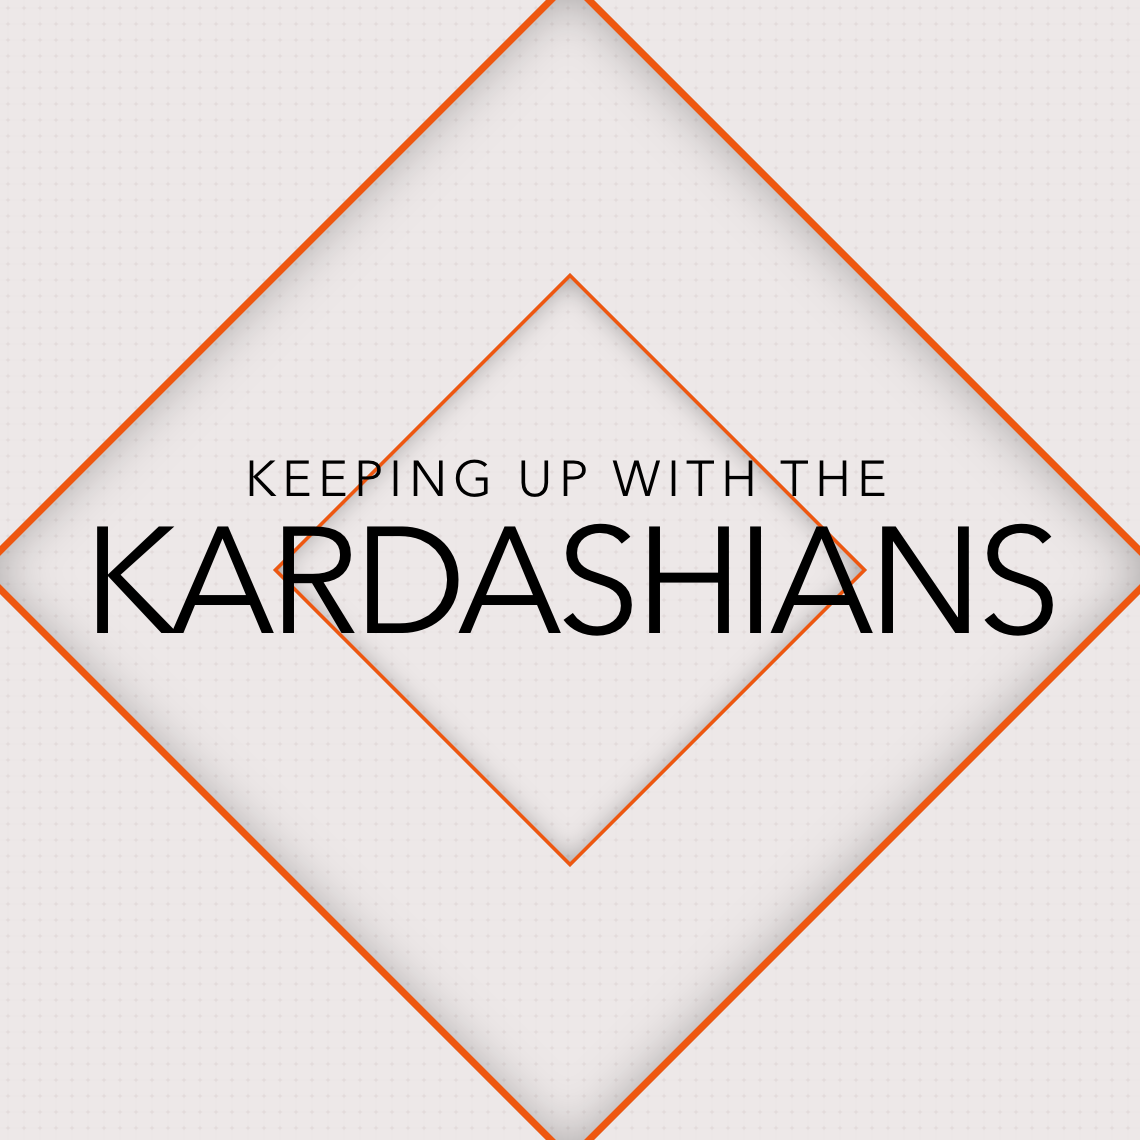 Watch online - Keeping Up with the Kardashians season 15 episode 16!